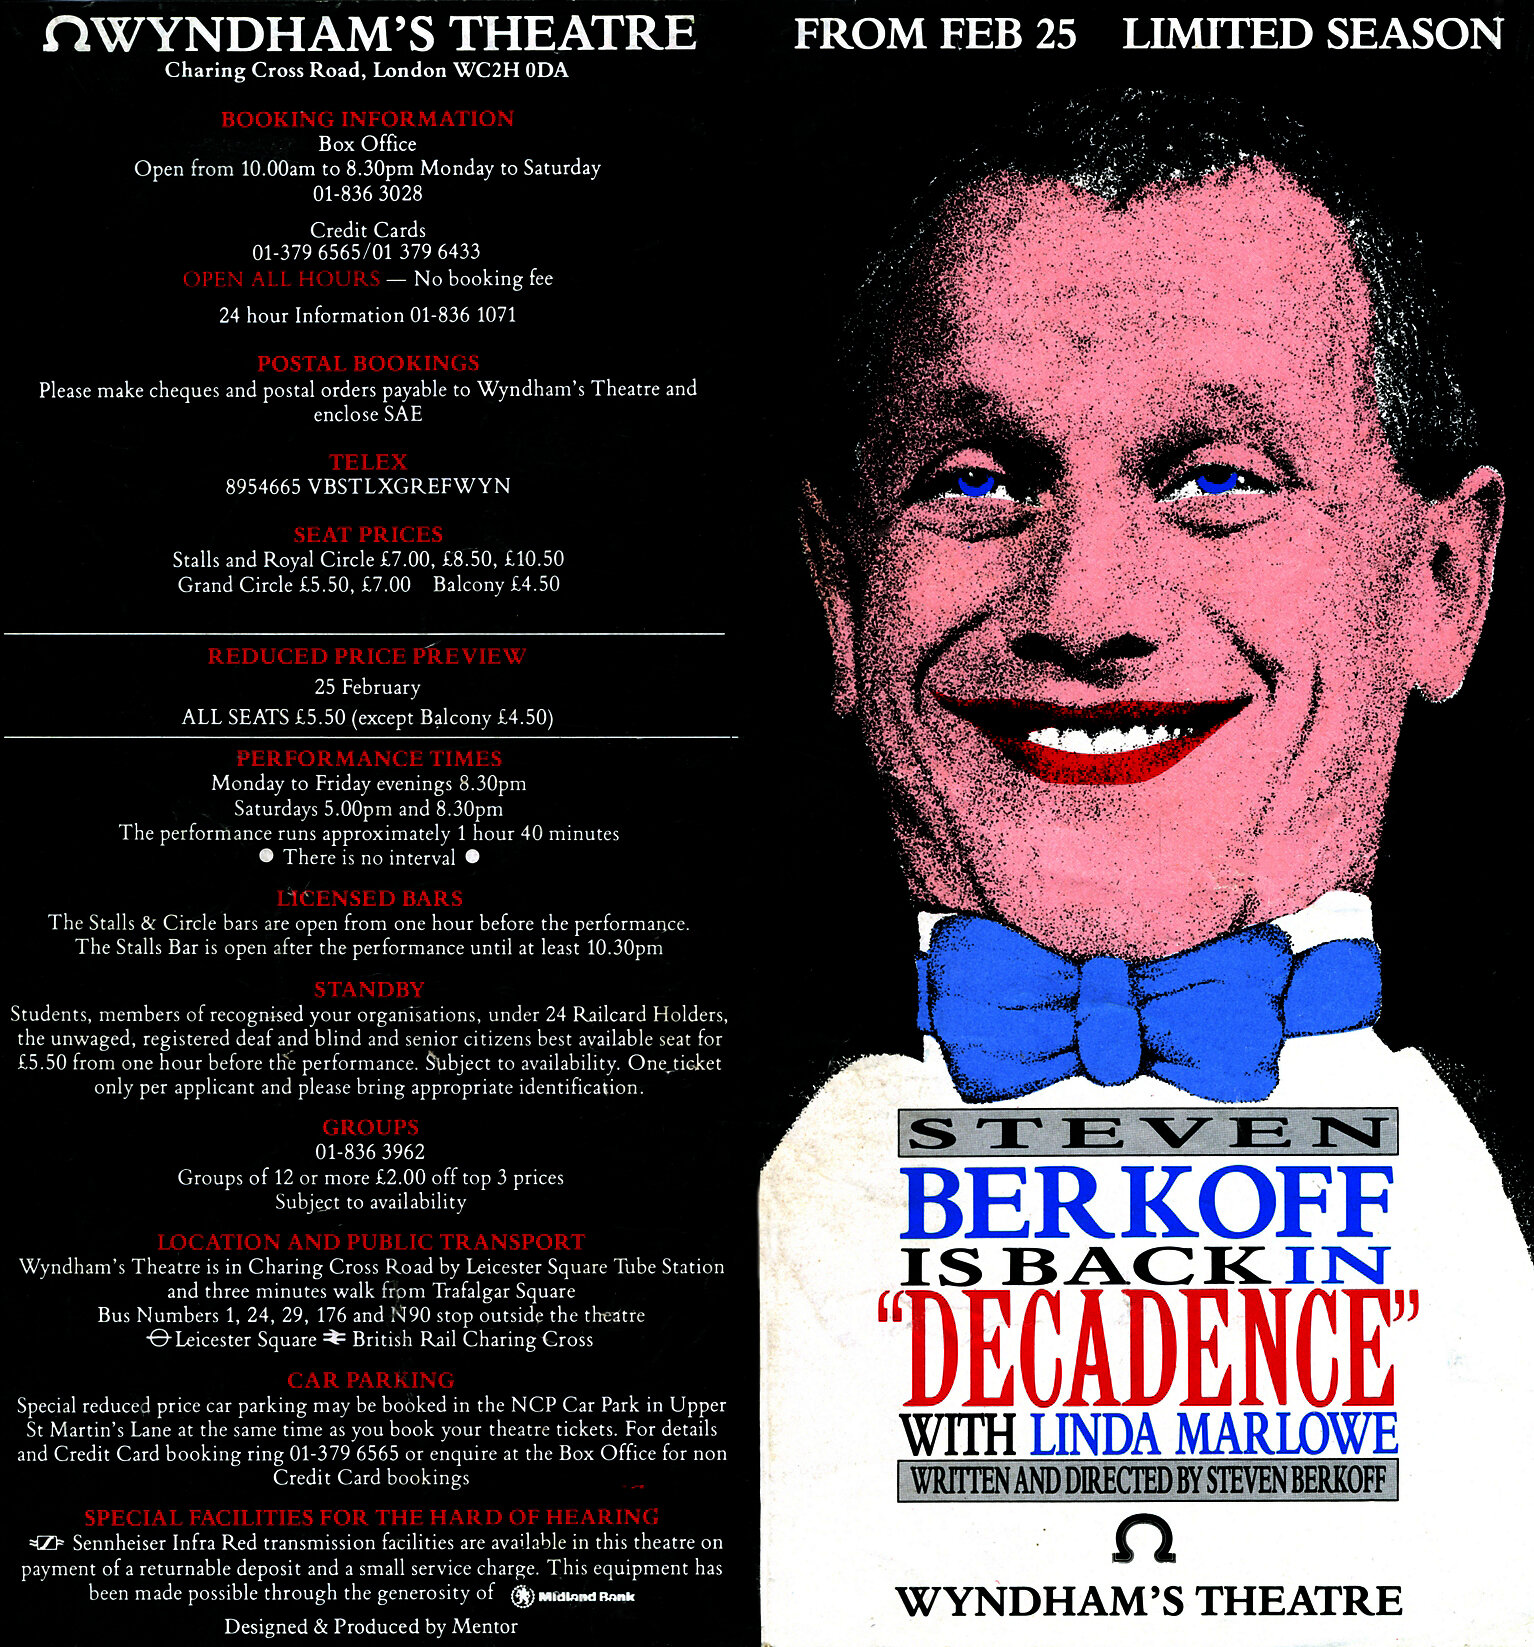 Steven Berkoff in Decadence.at the Wyndham's Theatre in London.